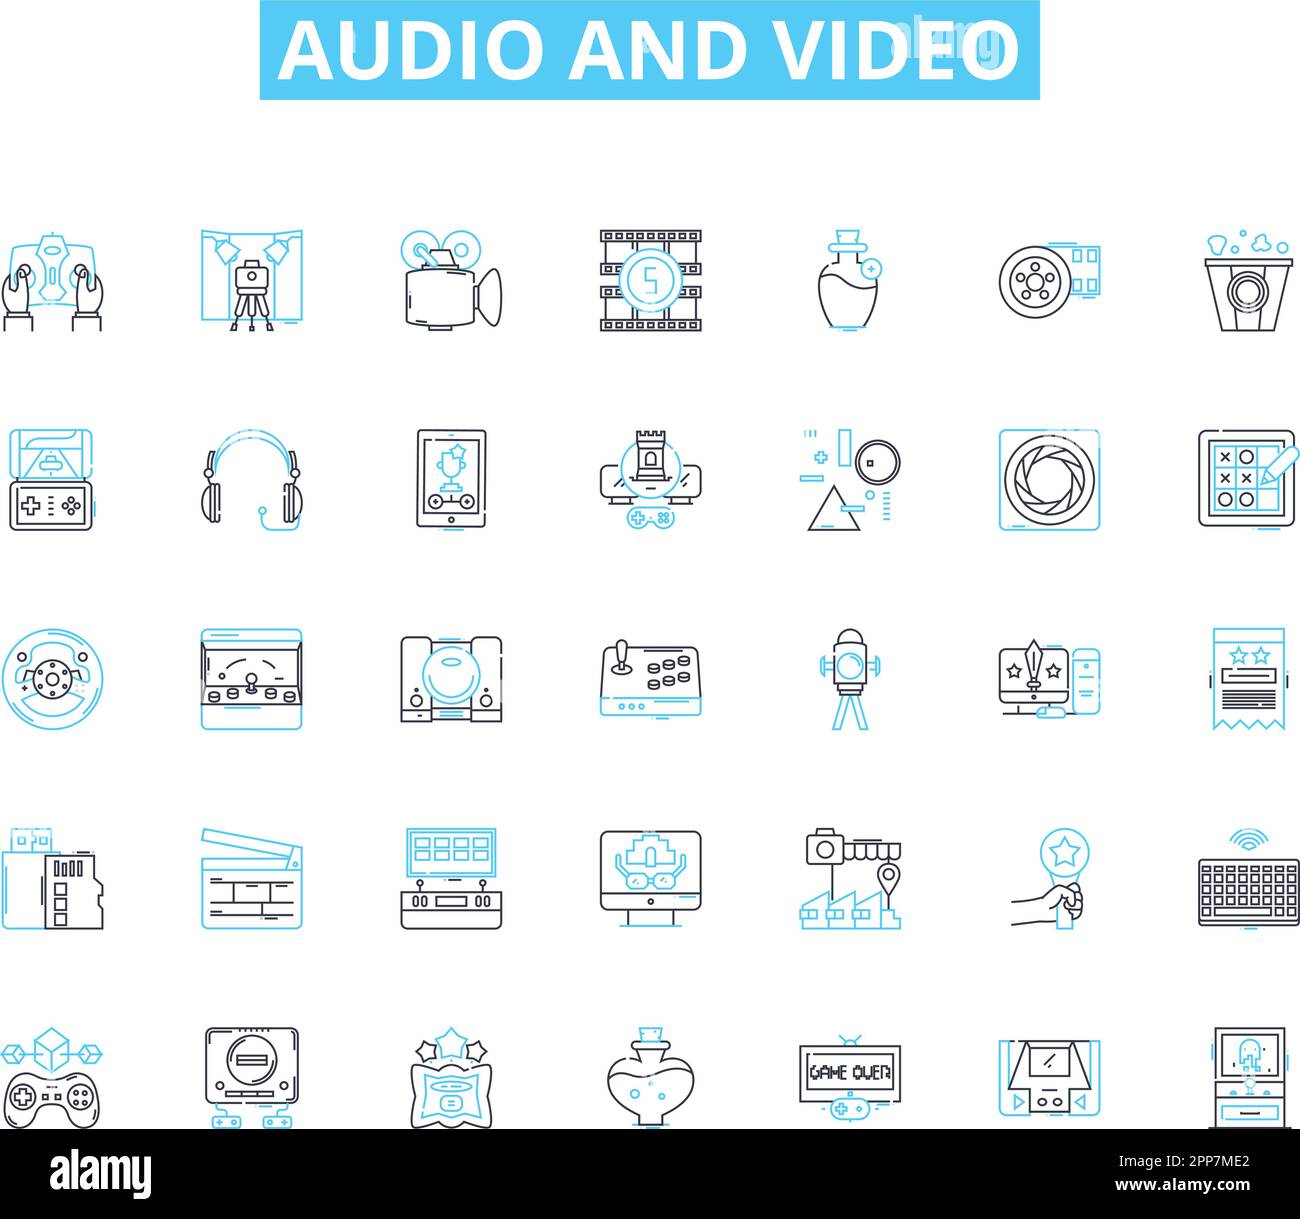 audio and video linear icons set. Playback, Streaming, Editing, Mixing, Recording, Encoding, Sampling line vector and concept signs. Synthesis Stock Vector